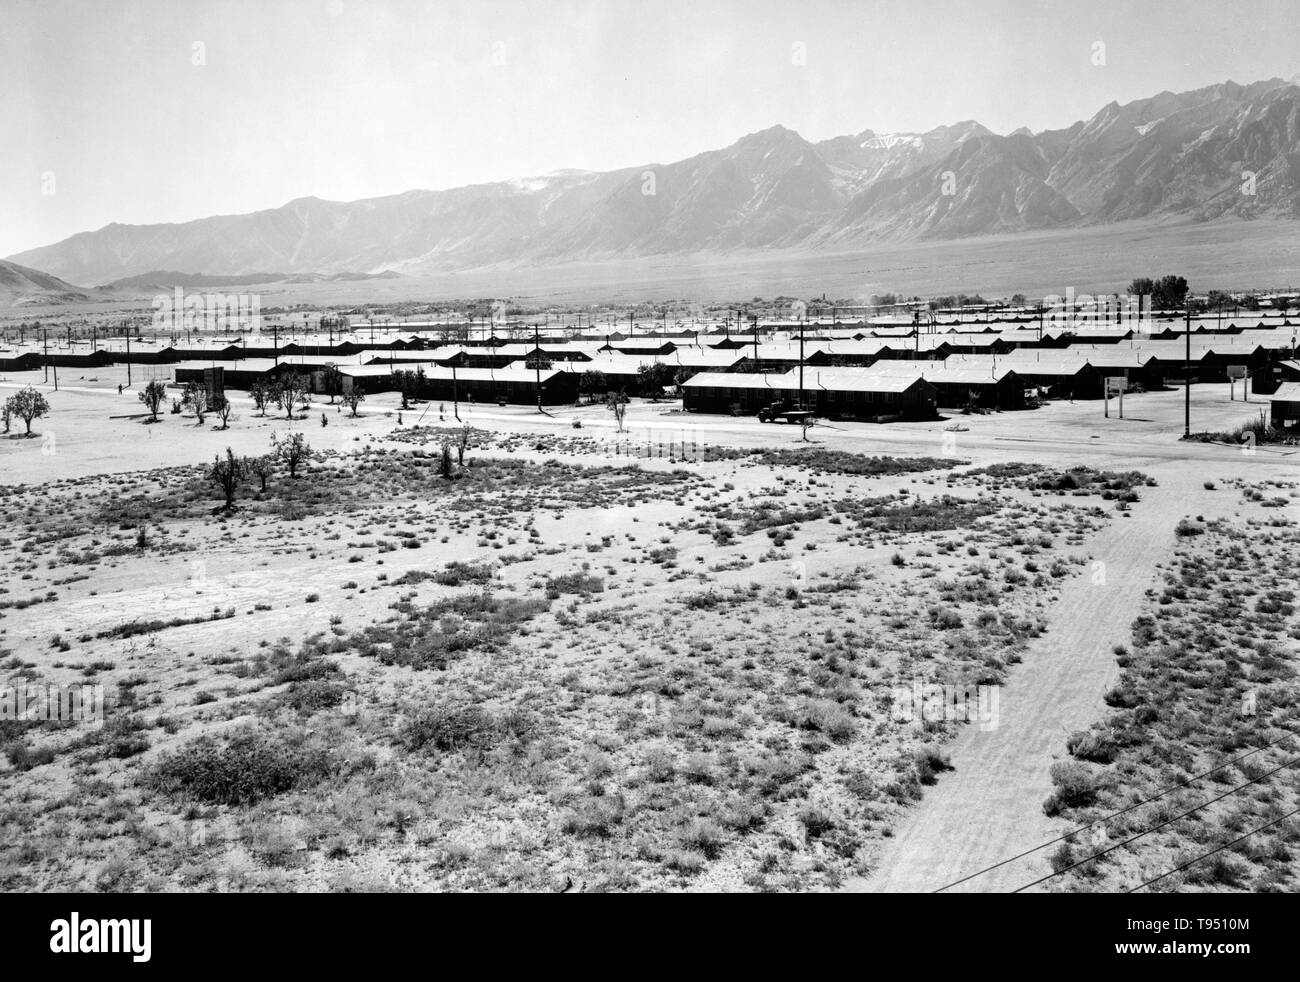 Entitled: 'Manzanar from guard tower, summer heat, view SW, Manzanar Relocation Center.' The internment of Japanese-Americans during WWII was the forced relocation and incarceration in camps of 110,000-120,000 people of Japanese ancestry (62% of the internees were US citizens) ordered by President Roosevelt shortly after Japan's attack on Pearl Harbor. Japanese-Americans were incarcerated based on local population concentrations and regional politics. Stock Photo